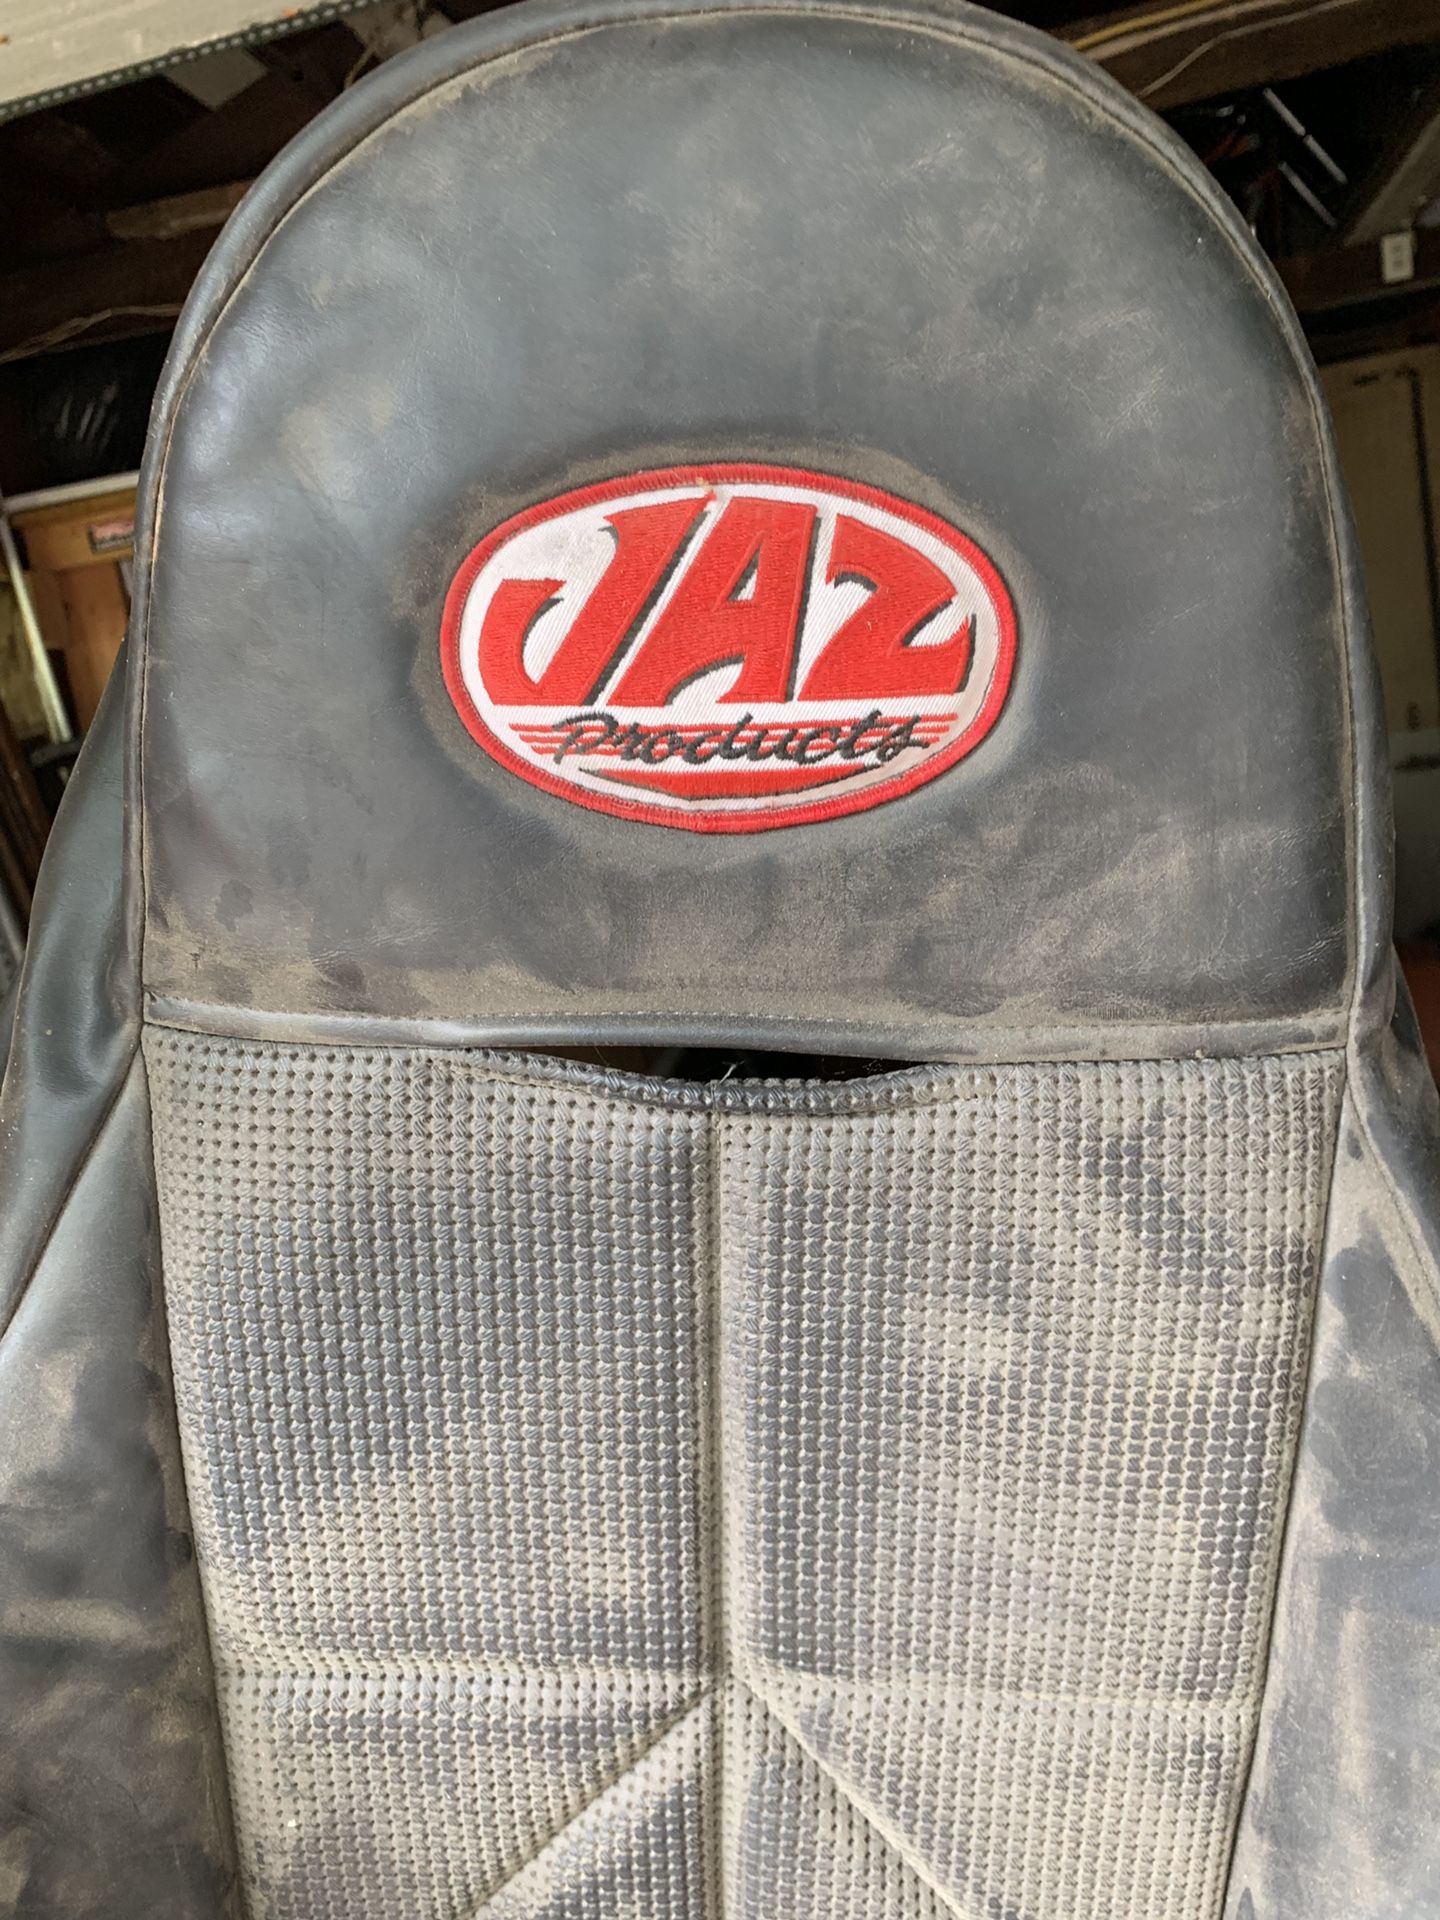 2 JAZ Racing seats and seat covers